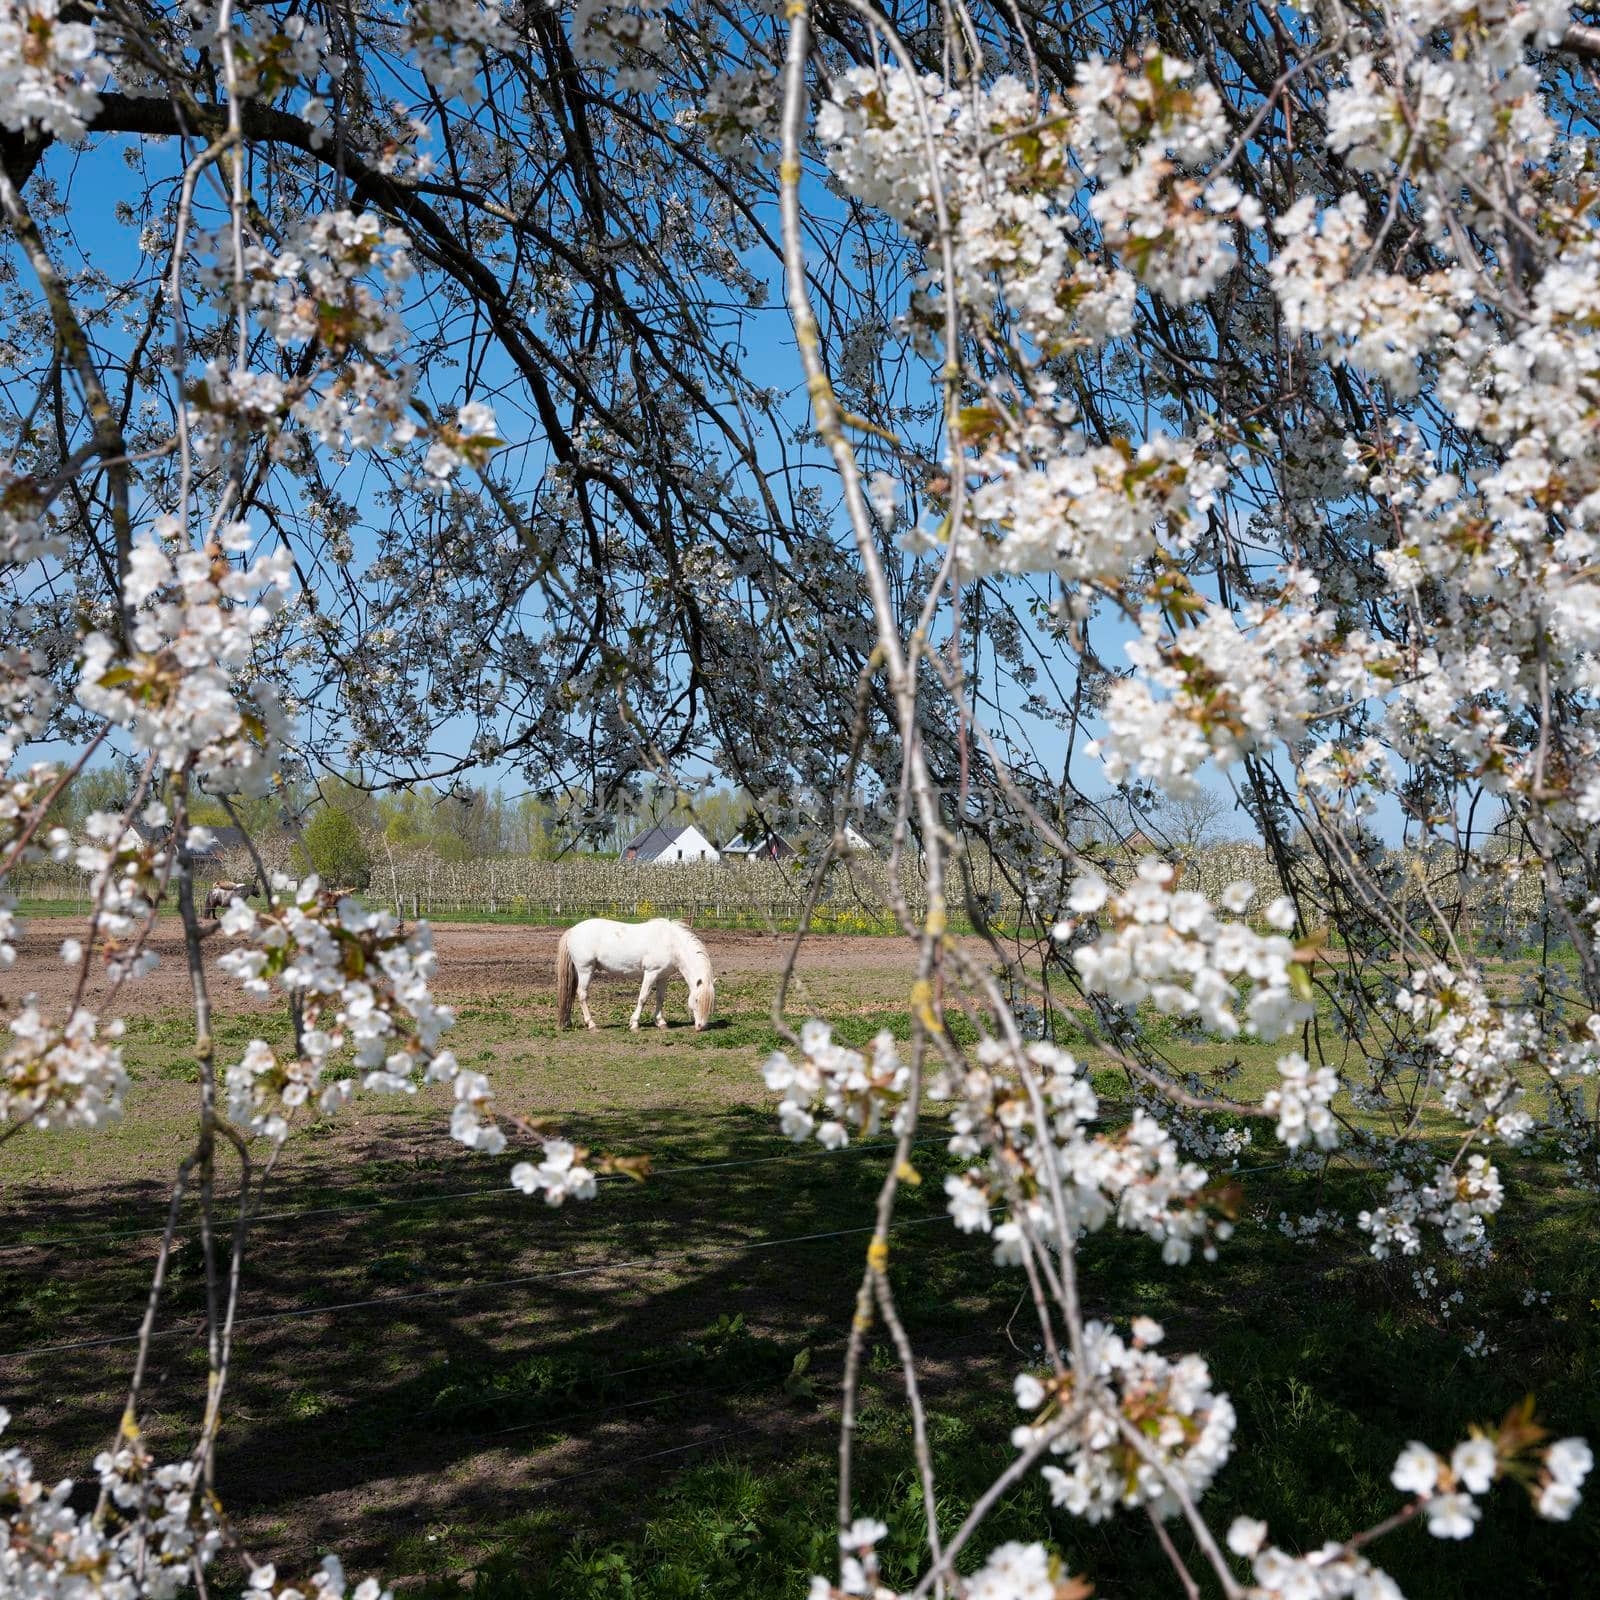 white horse amongst blossoming spring flowers in the netherlands under blue sky near fruit orchard